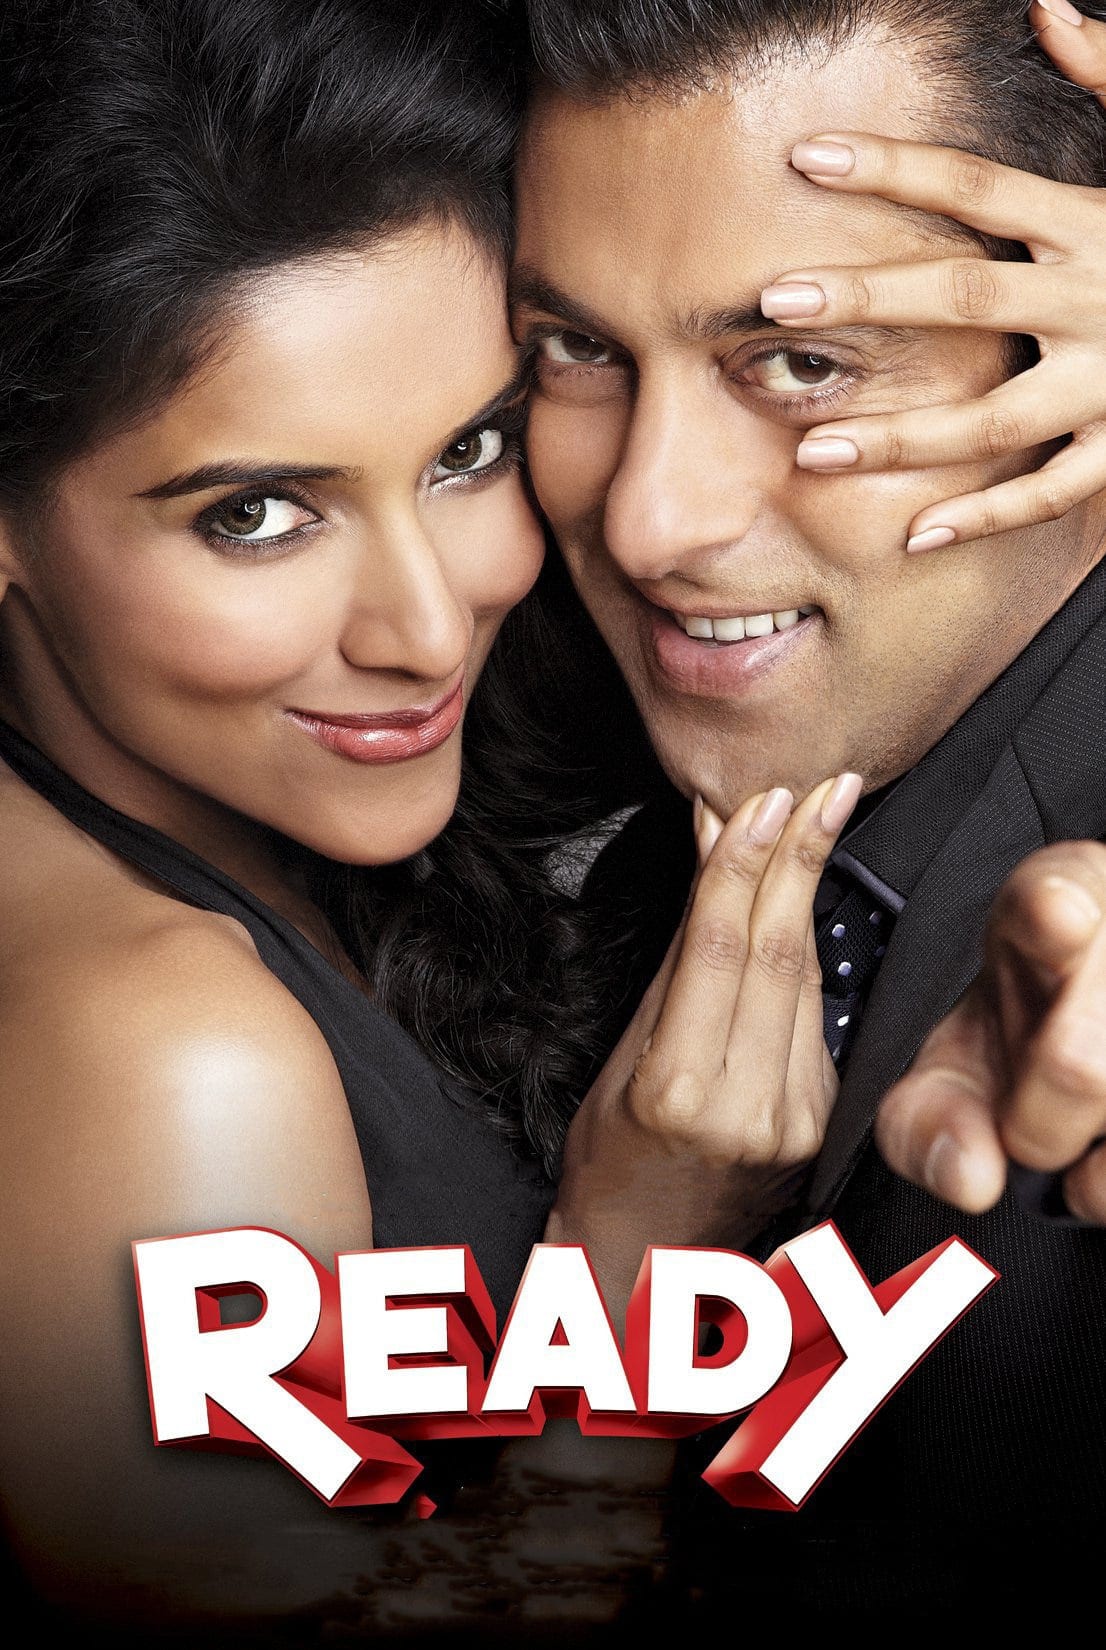 Poster for the movie "Ready"